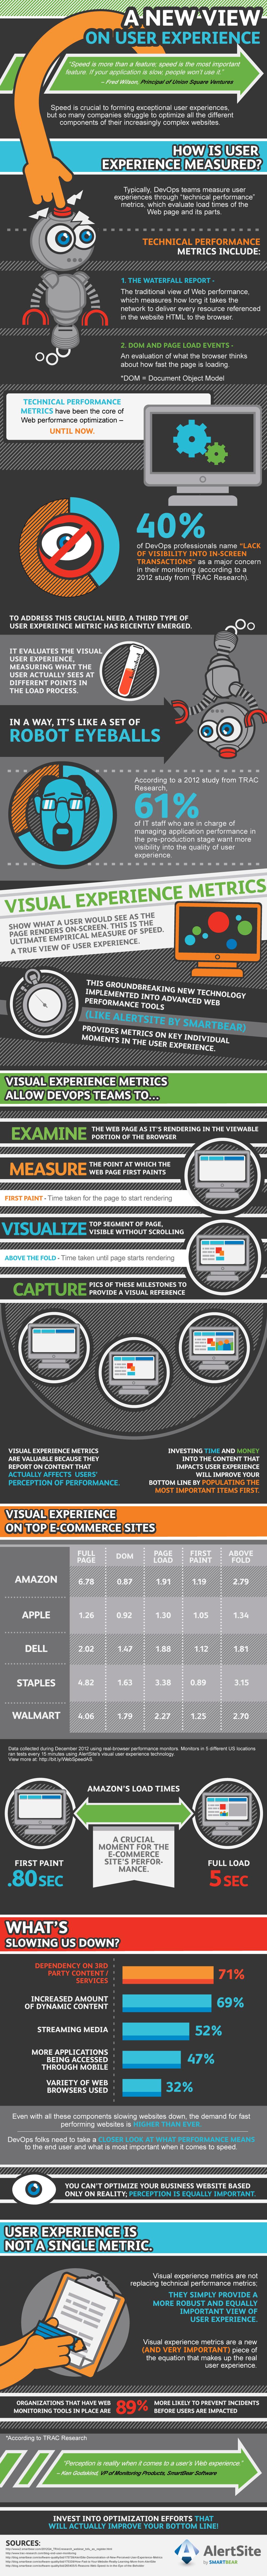 How UX Metrics are Changing the Way We Measure Web Speed [INFOGRAPHIC]